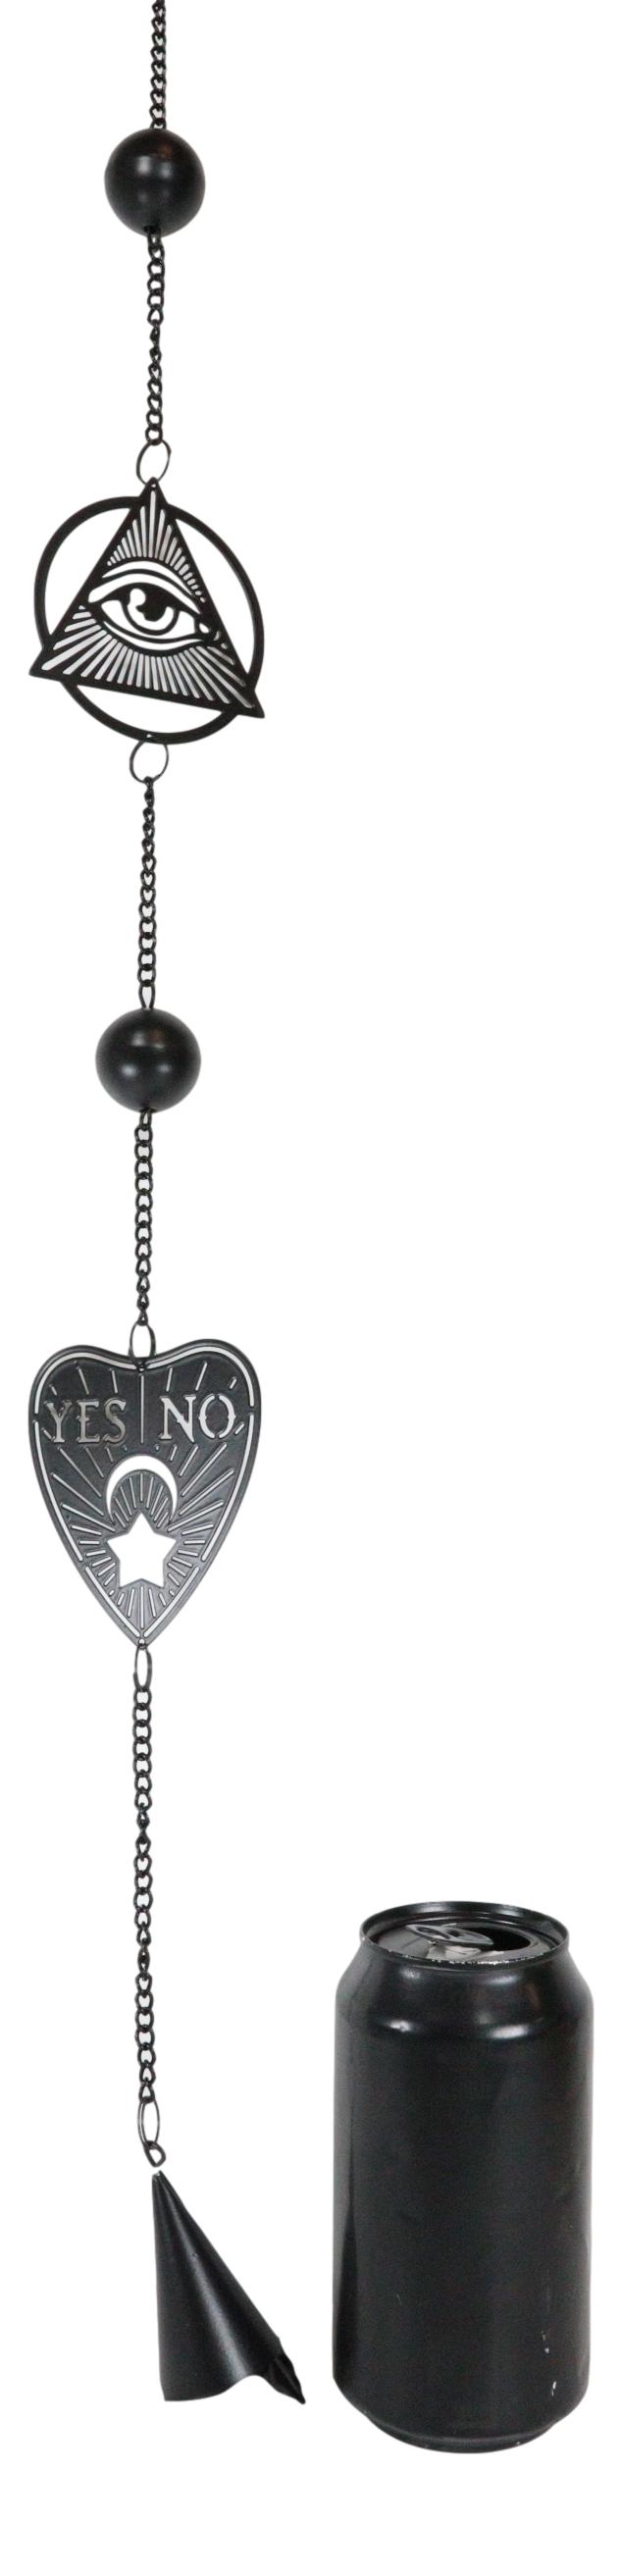 Ouija Planchette Eye Of Providence Metal Wall Hanging Mobile Wind Chime W/ Beads